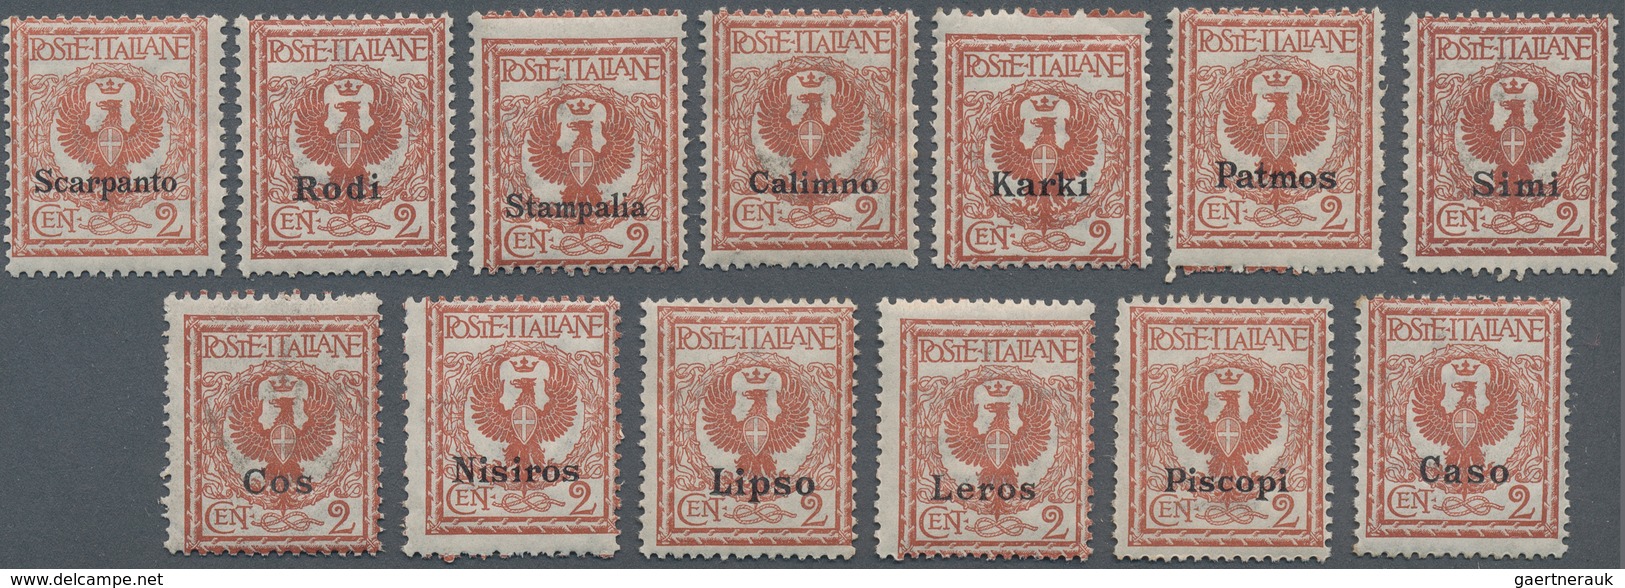 Ägäische Inseln: 1912 Accumulation Of About 950 Single Stamps 2c. Orange-brown, Consists Of 73 Stamp - Ägäis